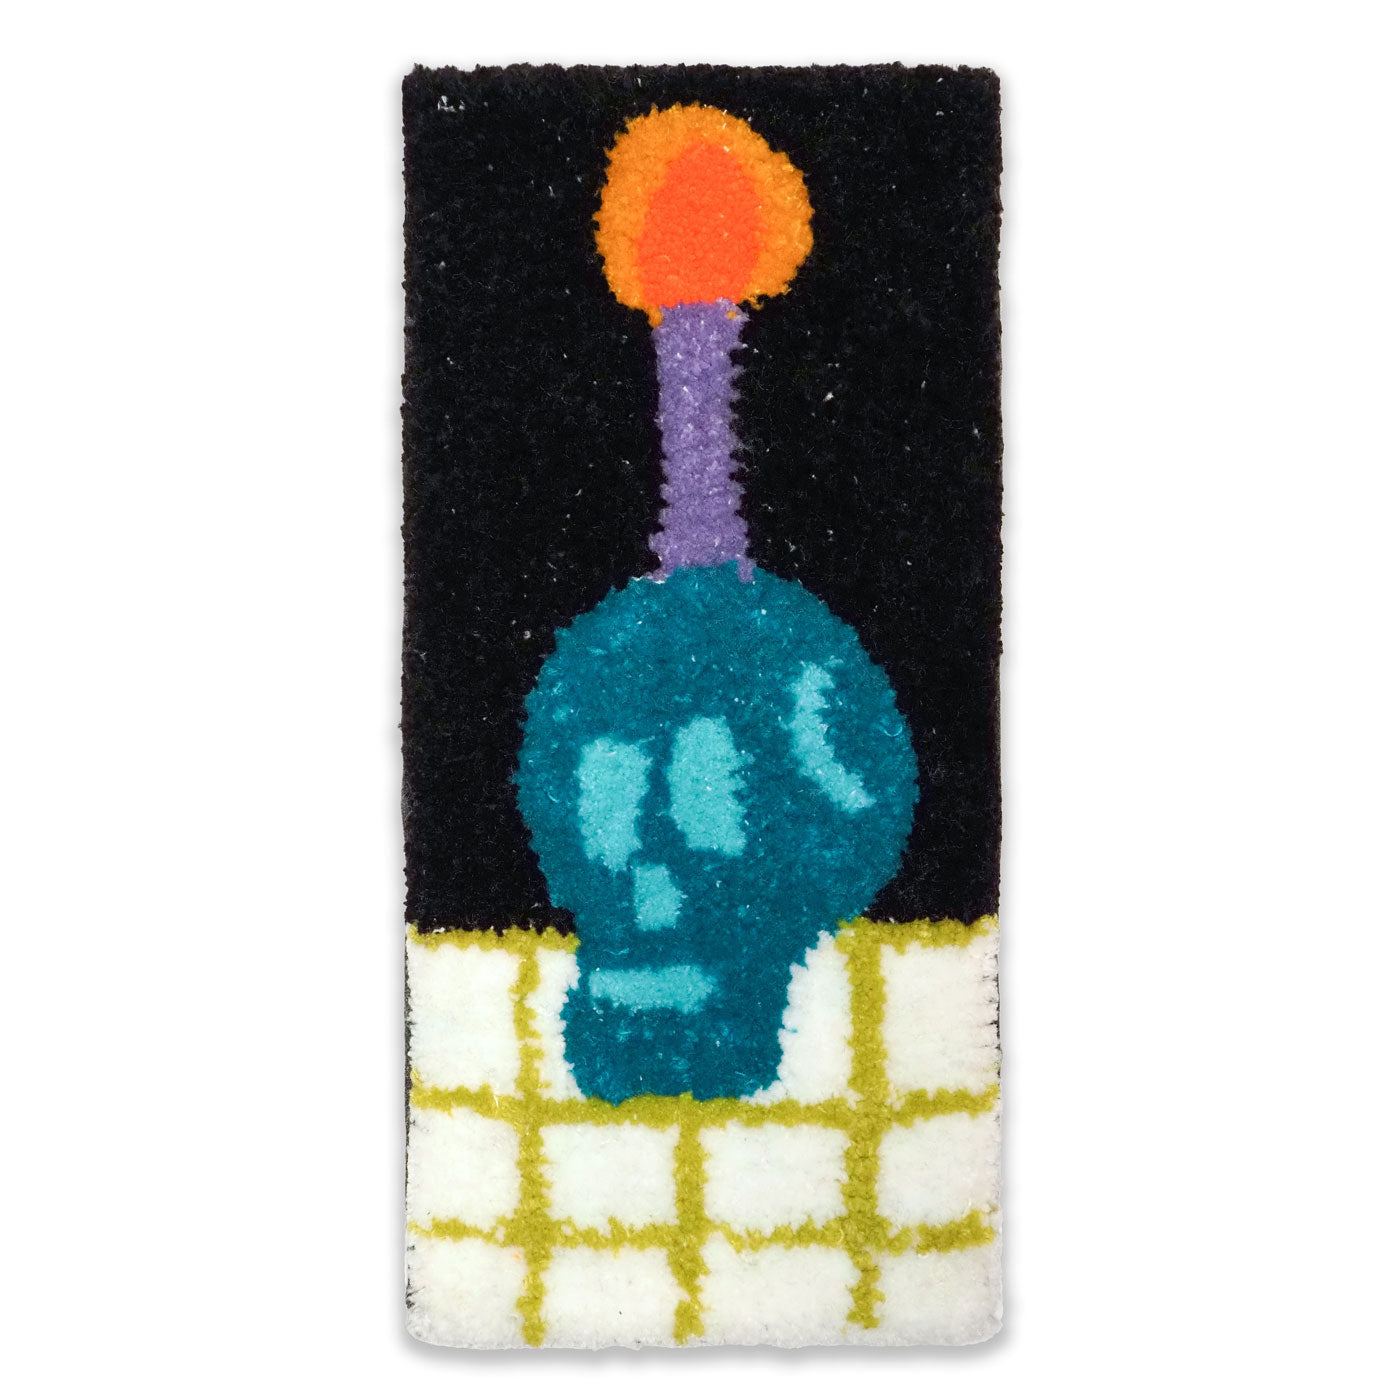 Hand-tufted wall hanging featuring a teal blue-colored skull on a white and green checked surface with a purple candle coming out of the top of its head